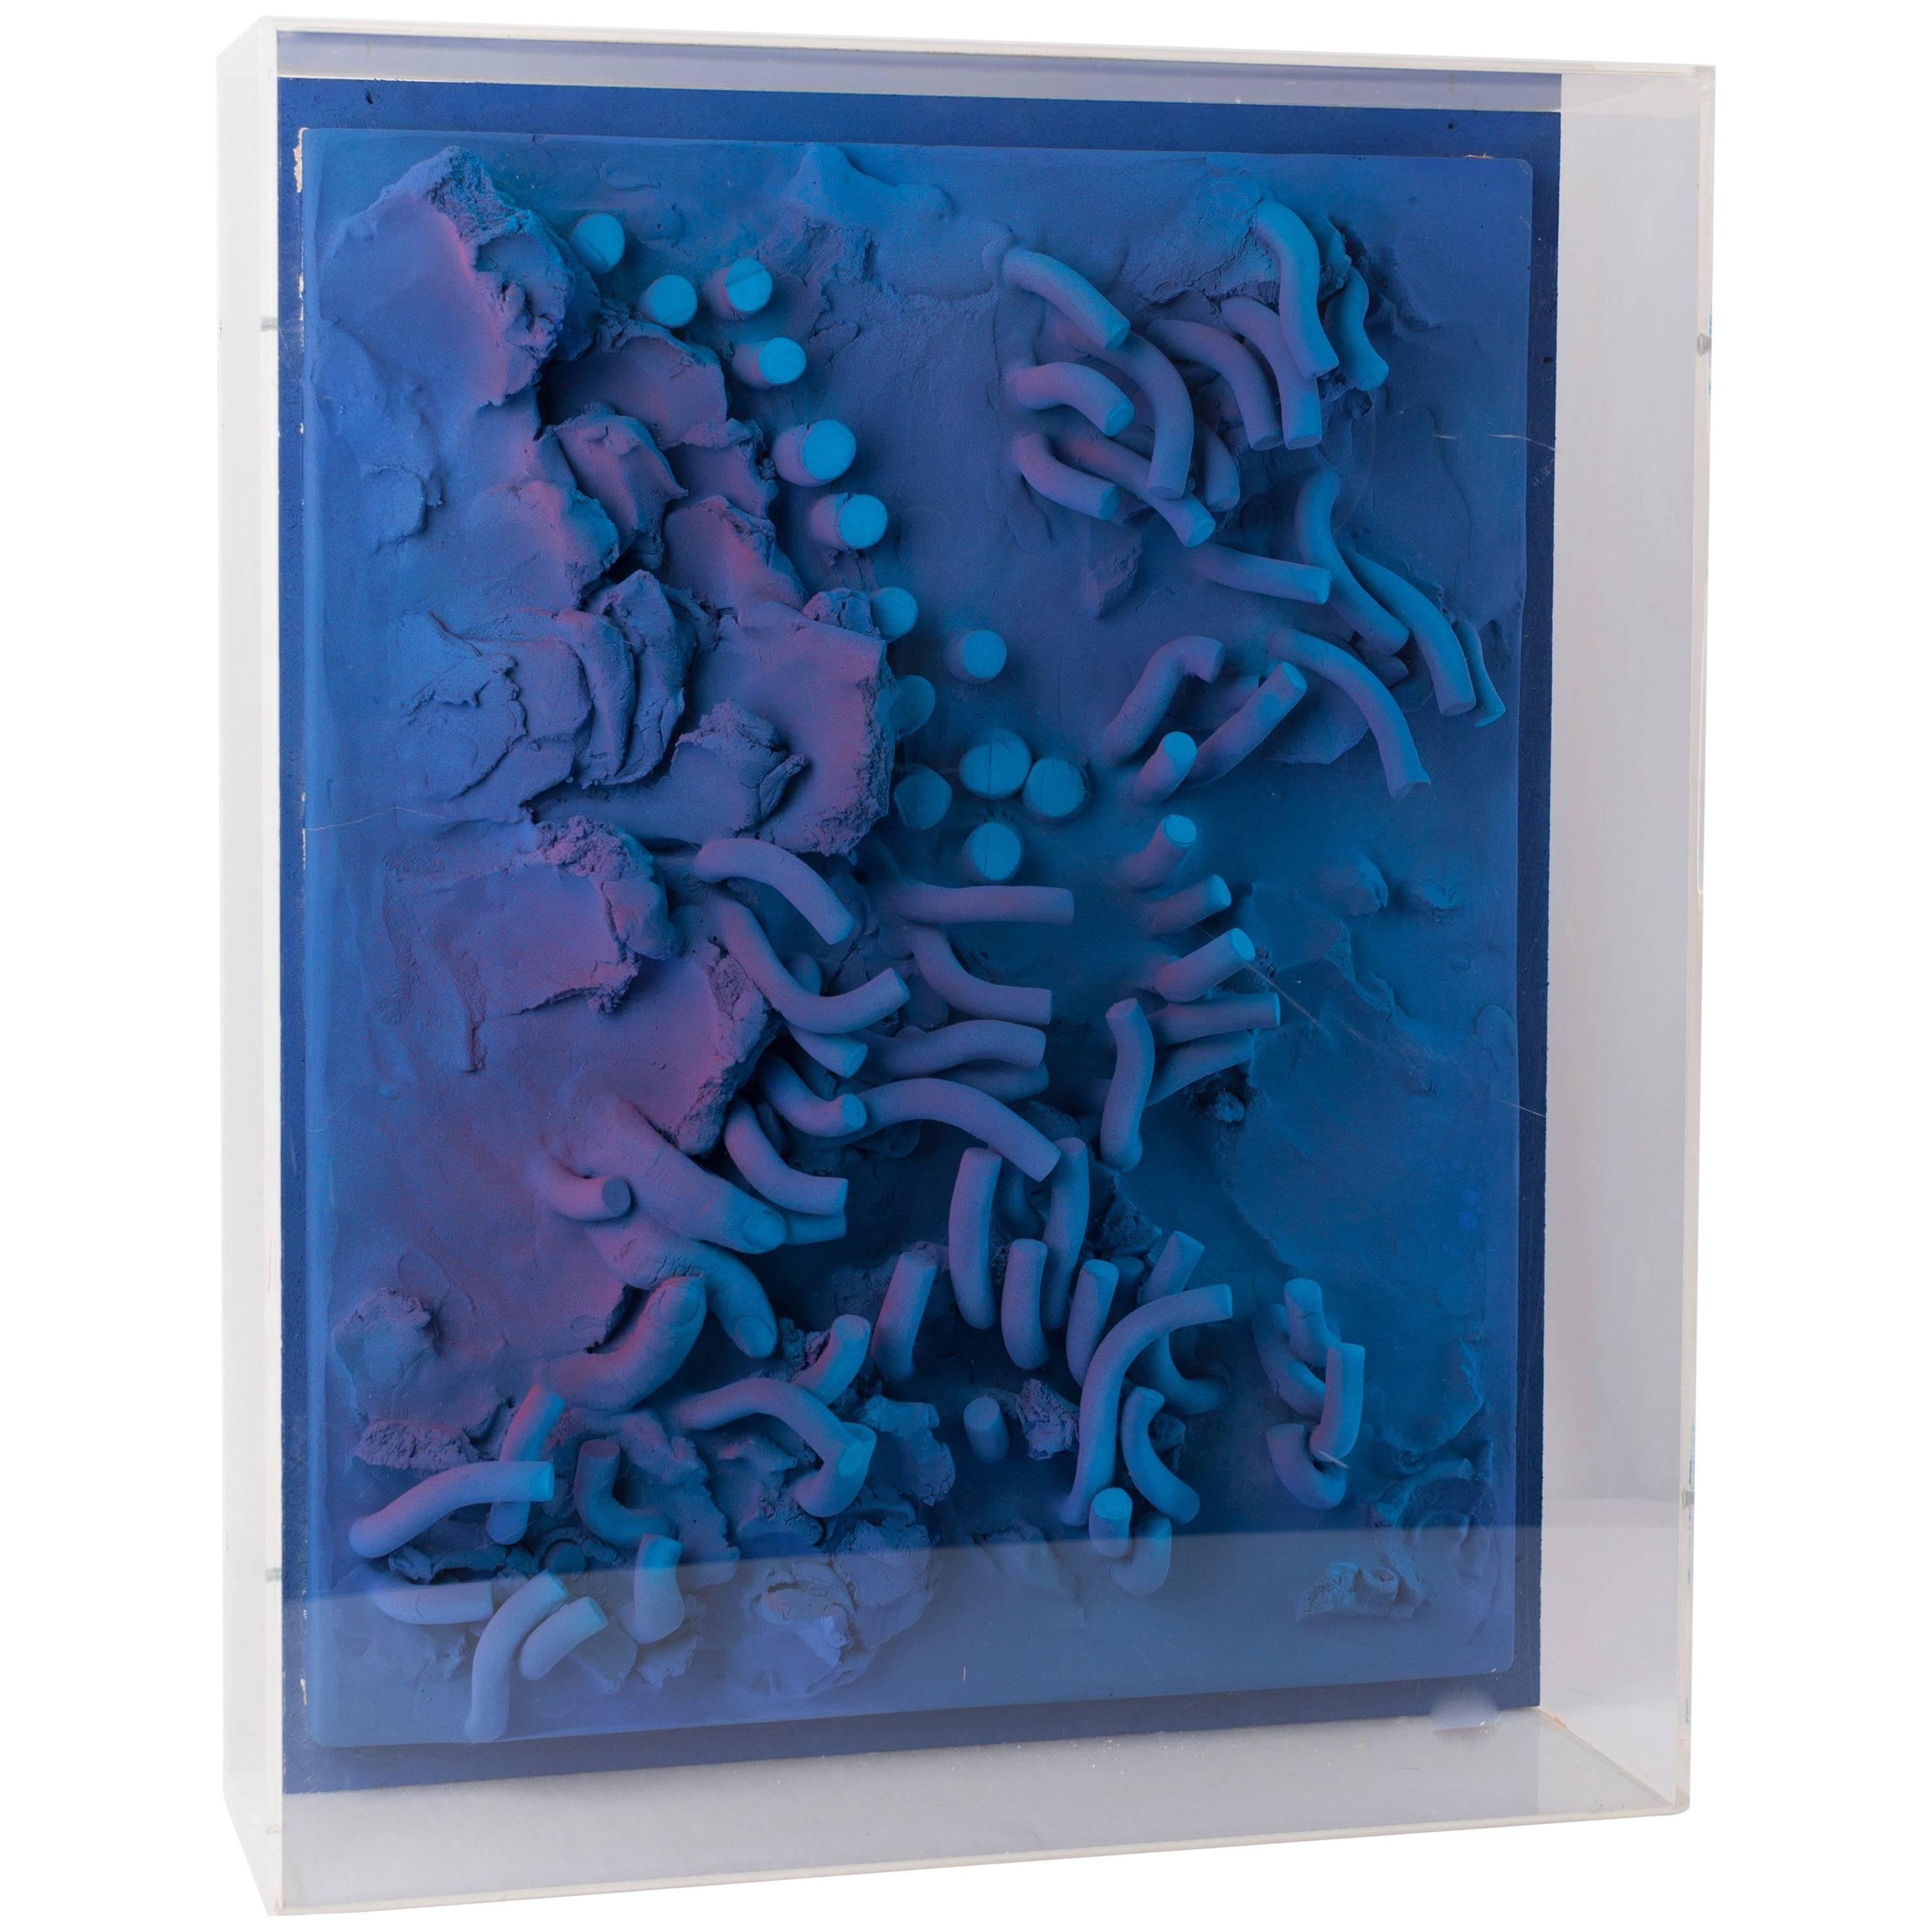 Wall Sculpture with Optical Art in Plexiglass created by César Bailleux